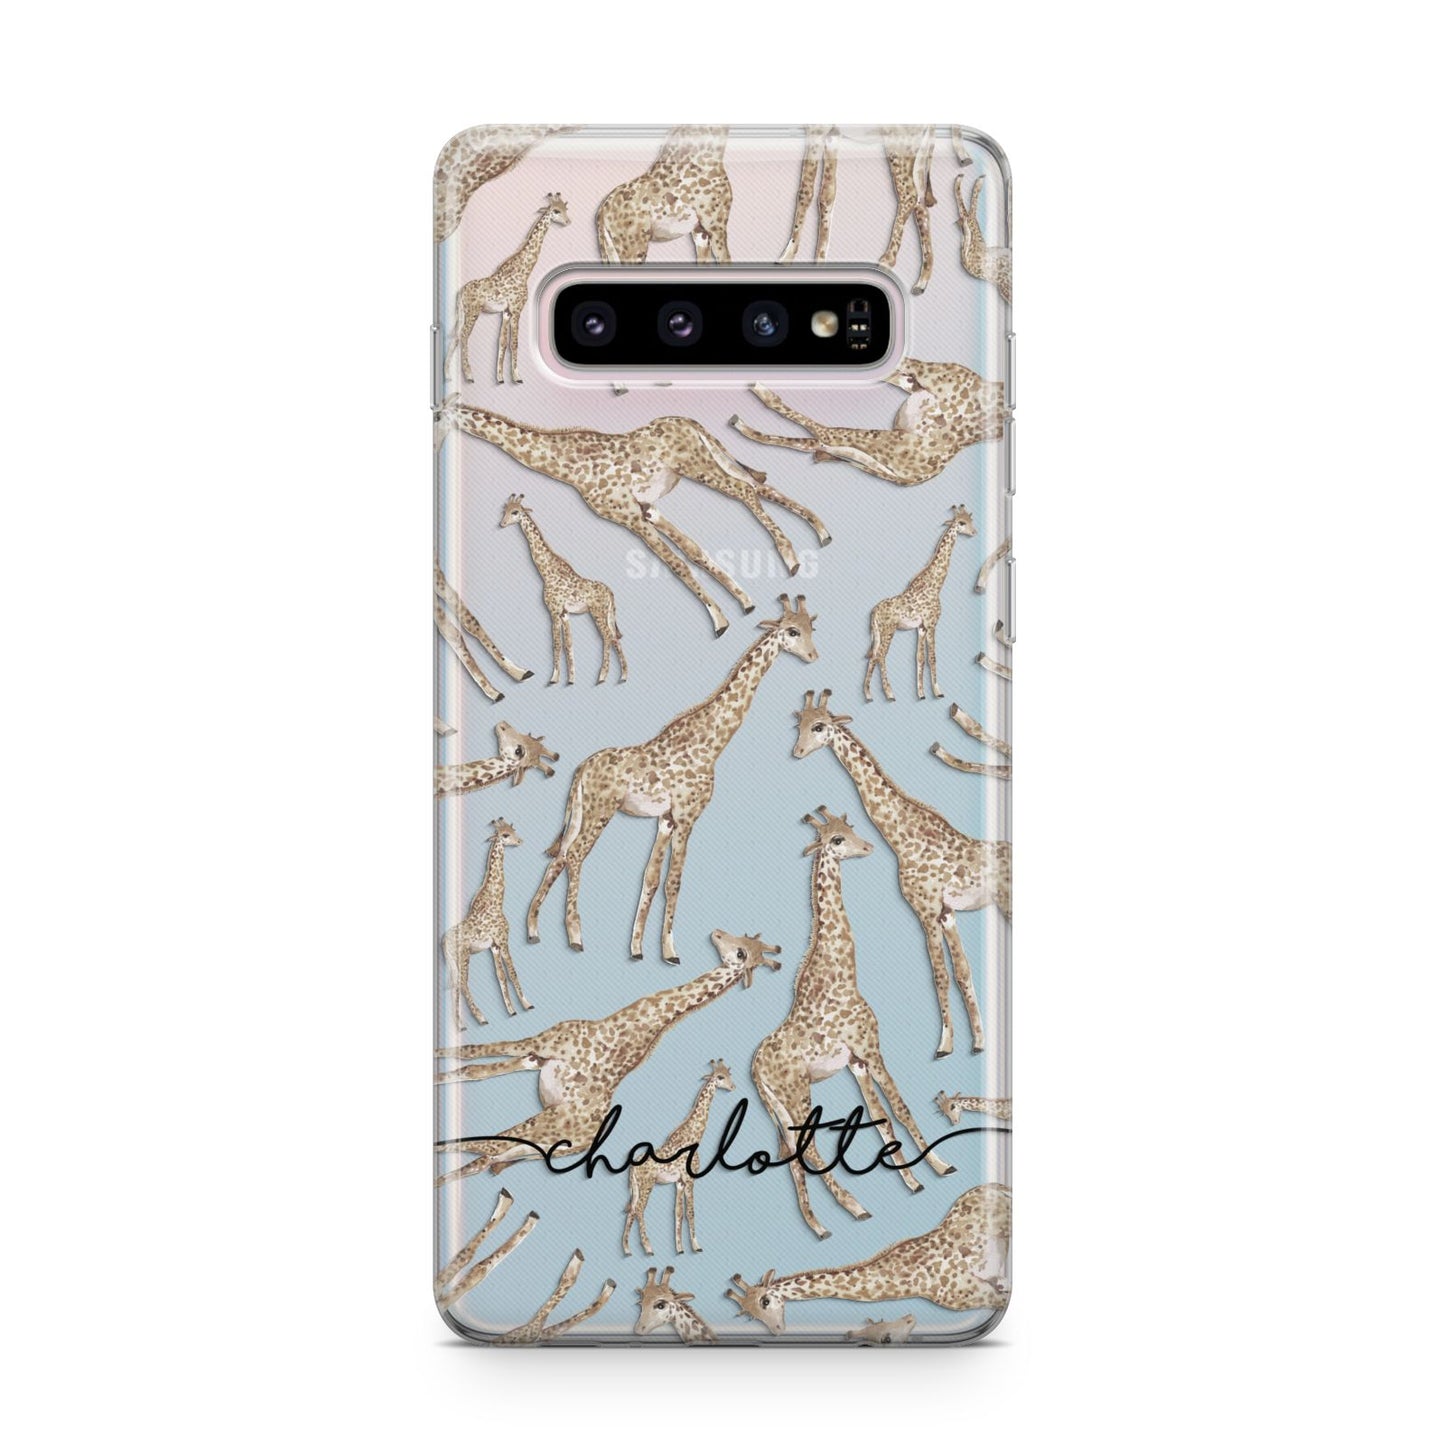 Personalised Giraffes with Name Samsung Galaxy S10 Plus Case